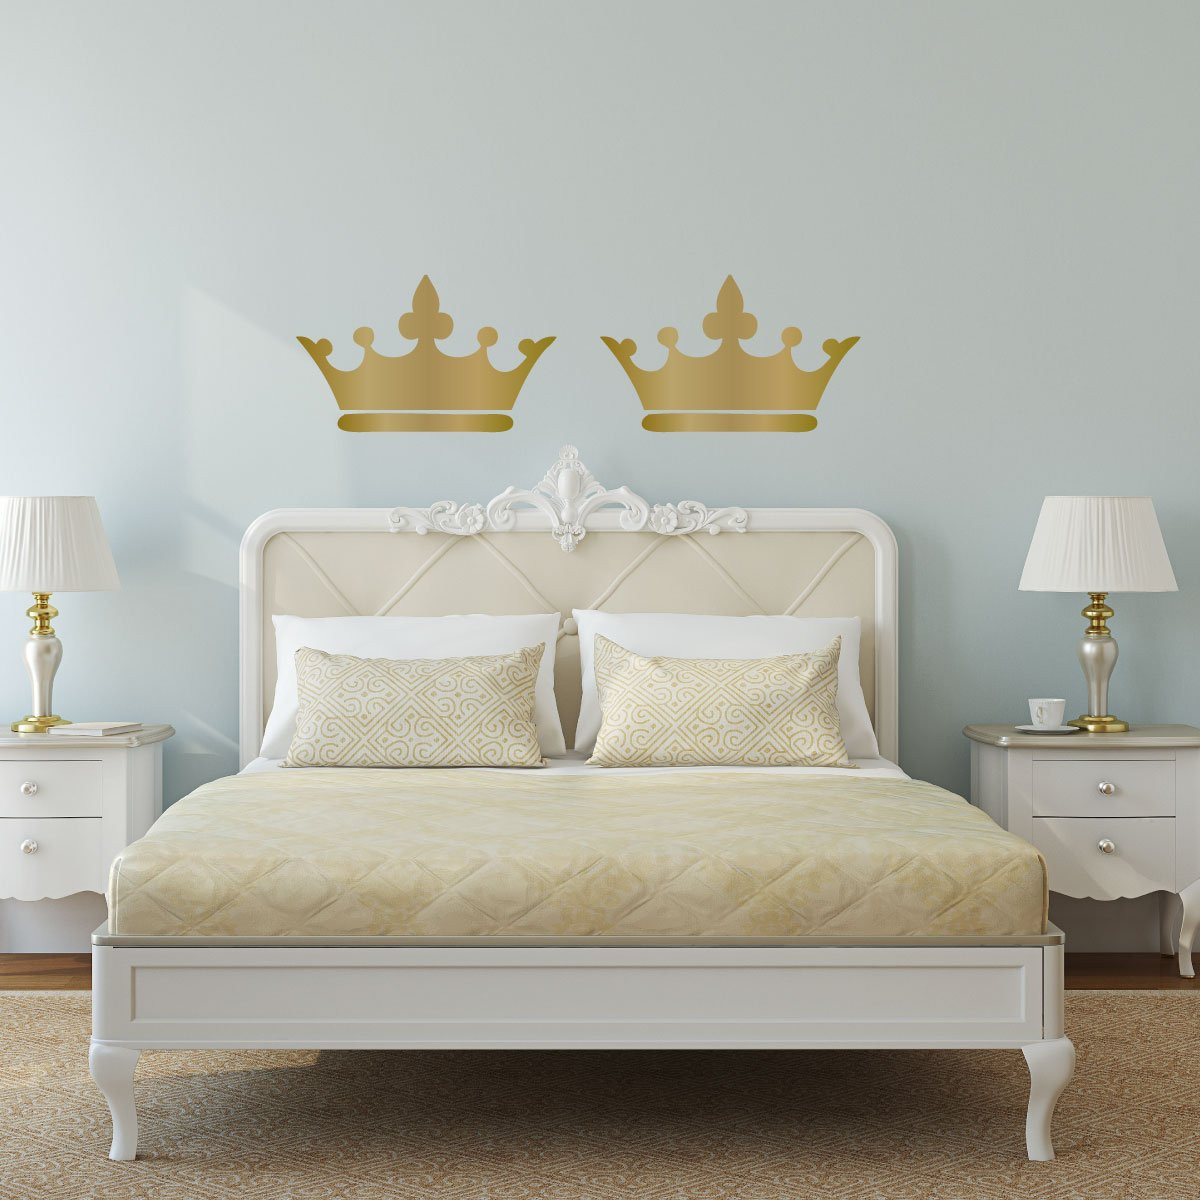 Crown Decor For Baby Room
 Princess Crown Wall Decal 25in x 15in Metallic Gold